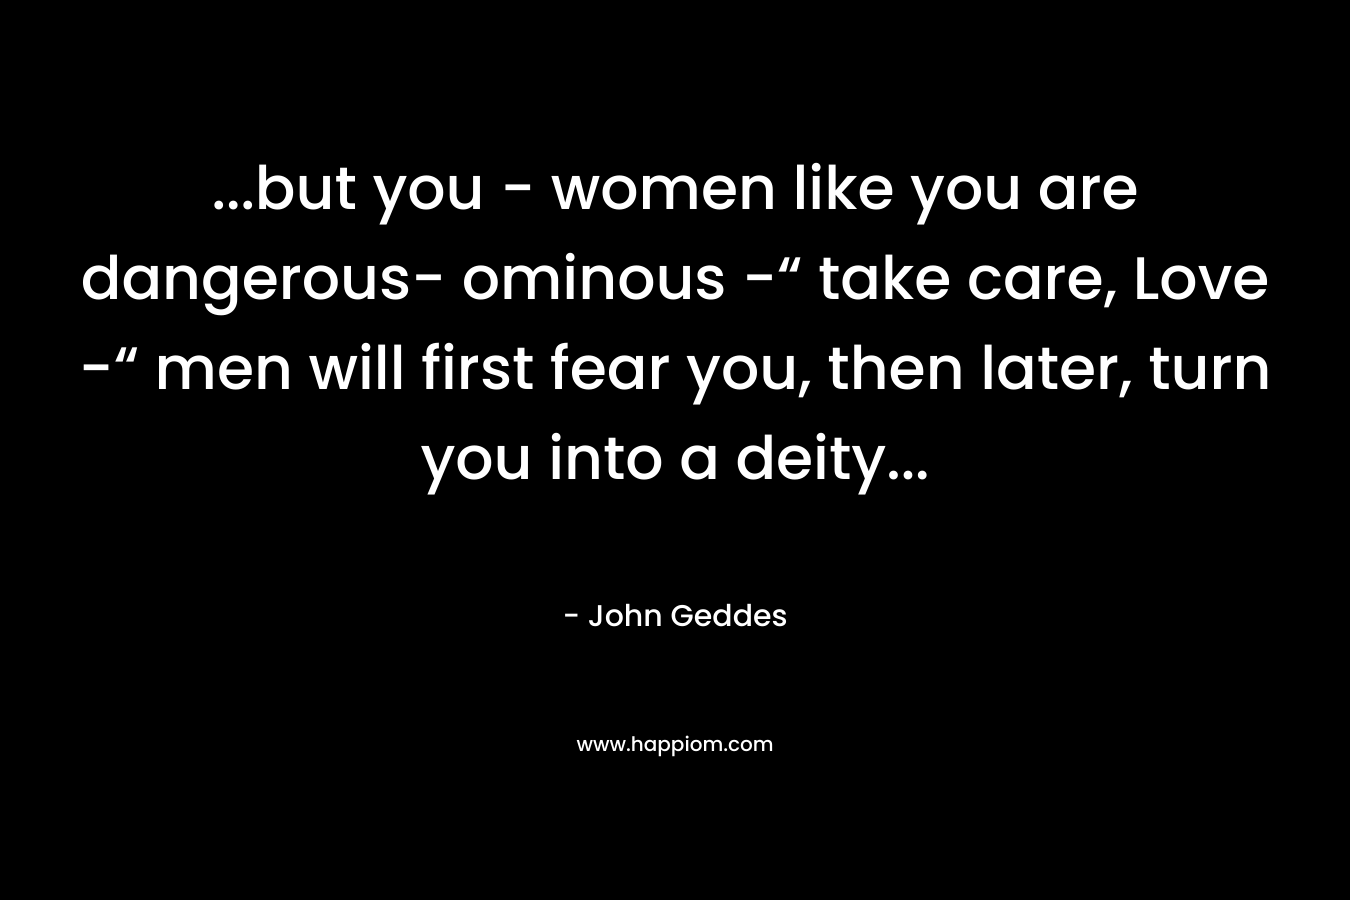 …but you – women like you are dangerous- ominous -“ take care, Love -“ men will first fear you, then later, turn you into a deity… – John Geddes